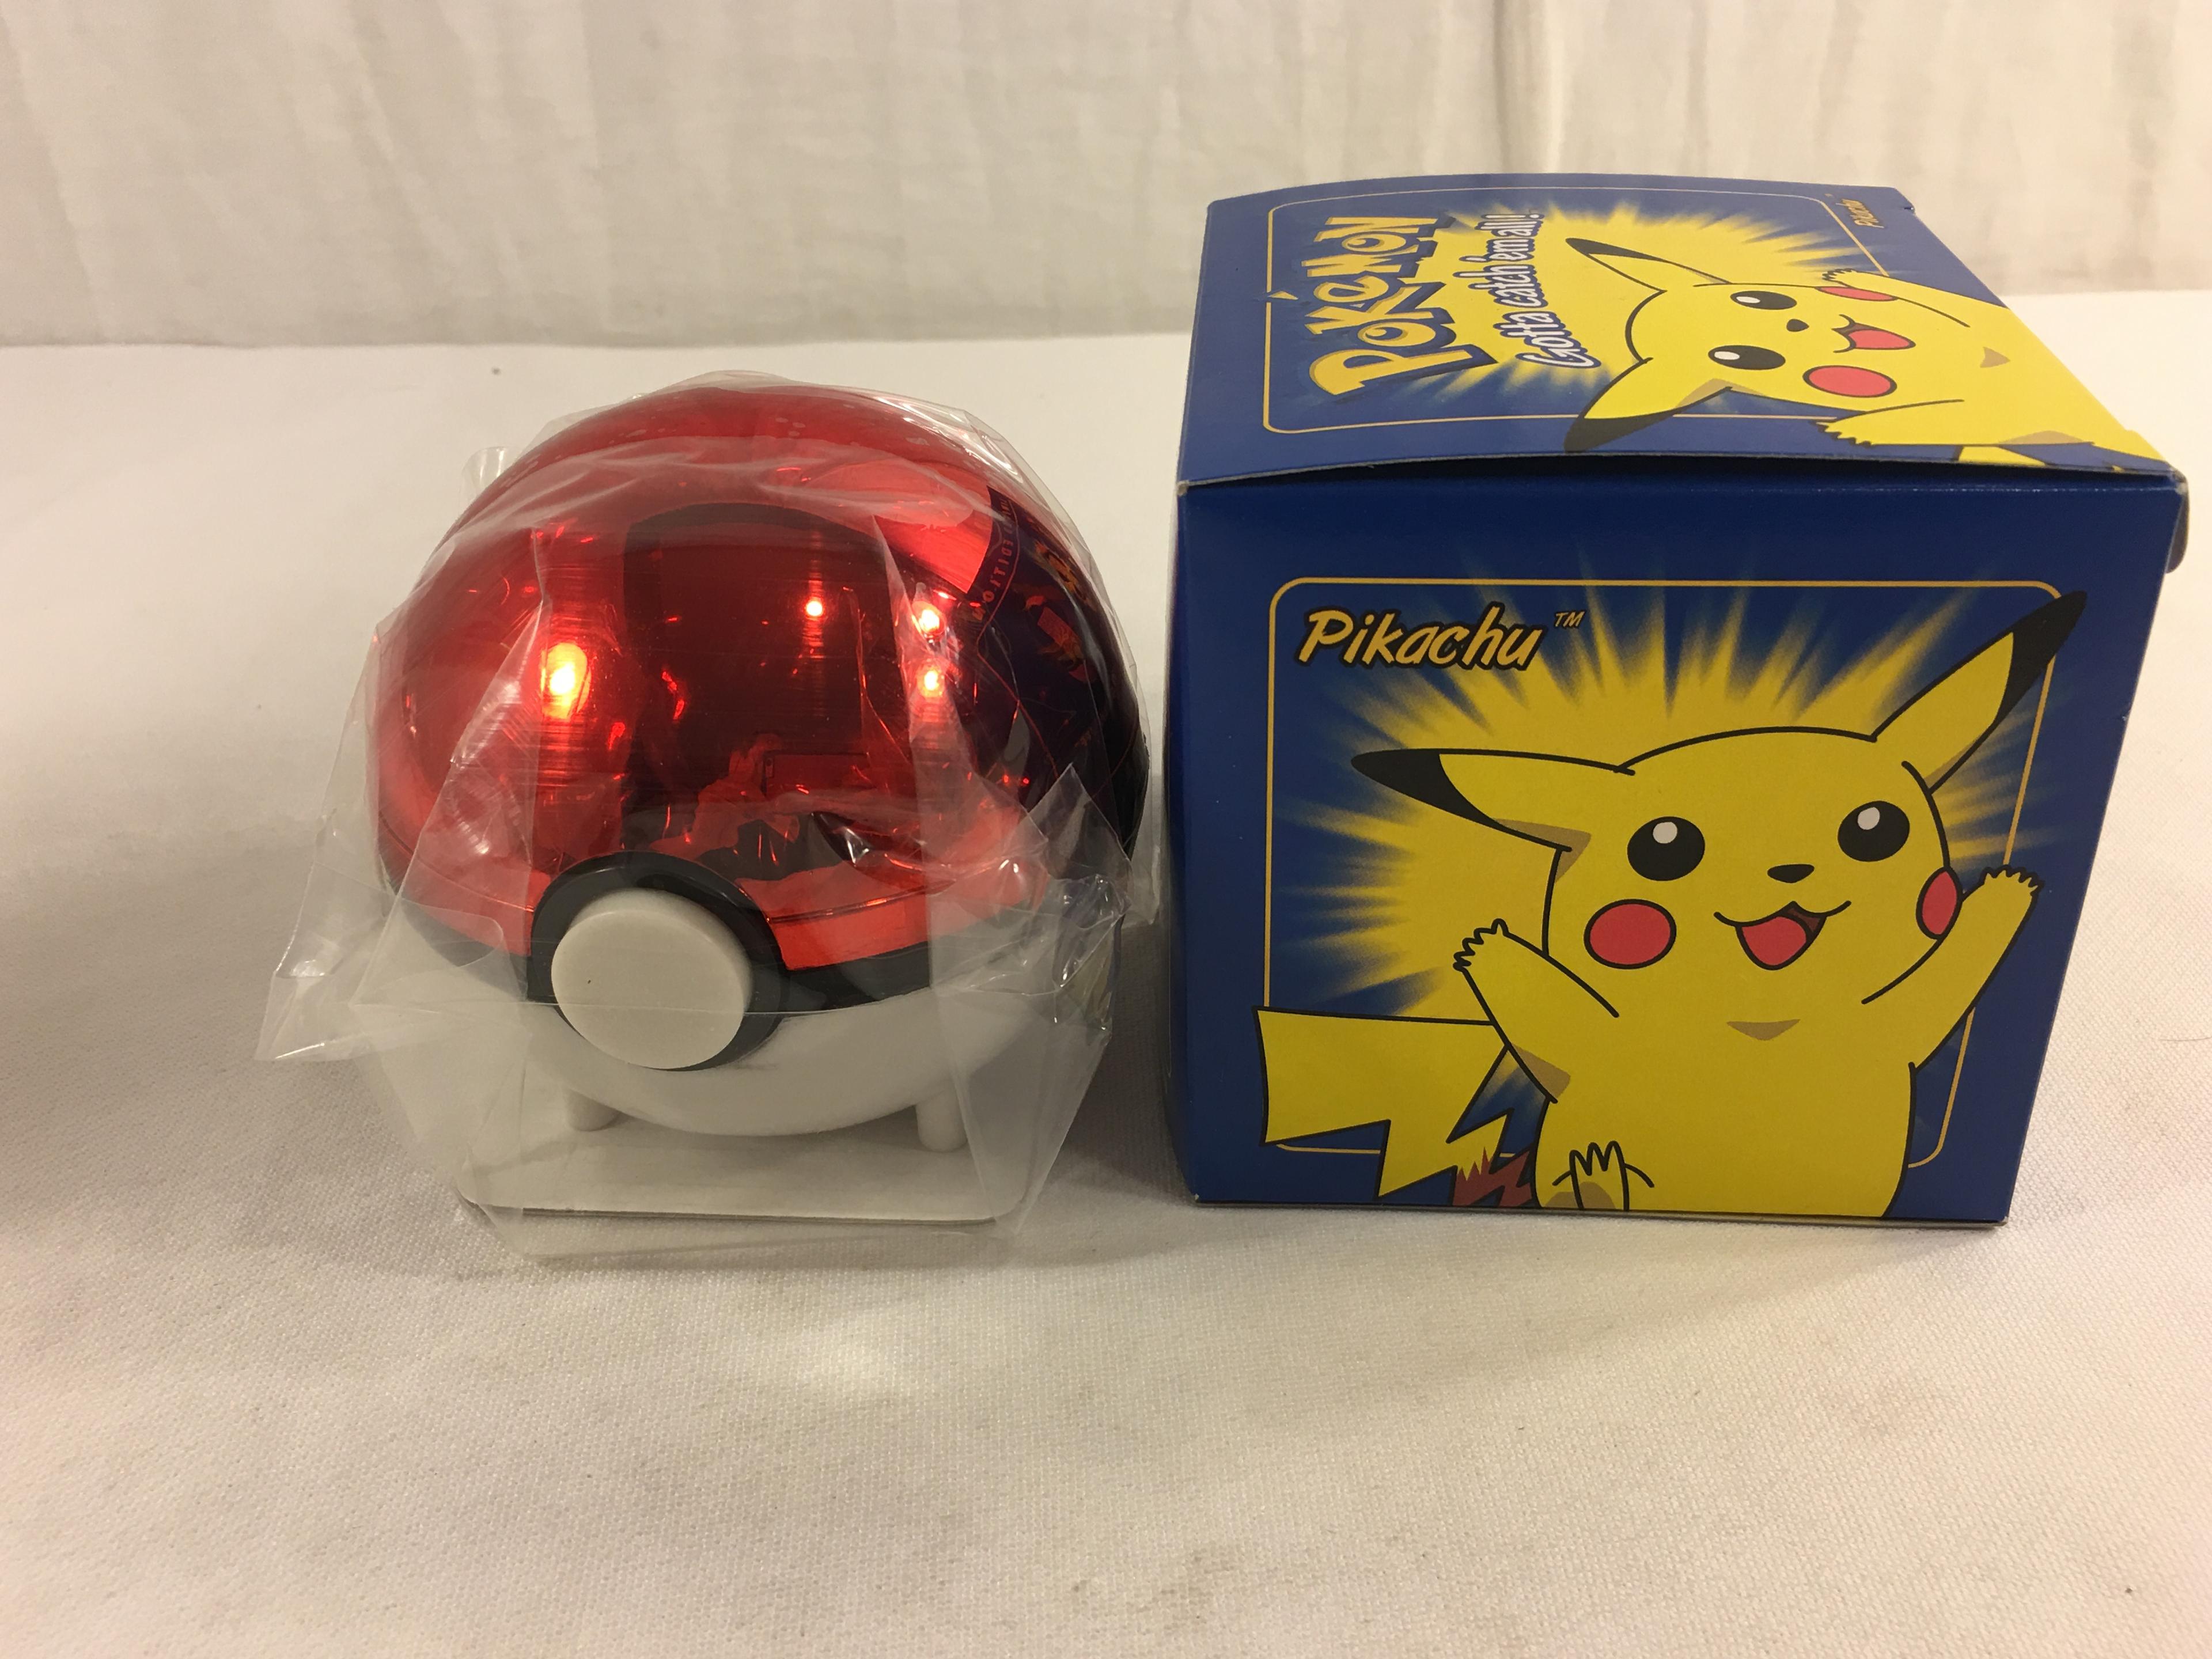 Collector 1998 Nintendo Limited Edition Pokemon 23k -Gold Plated Trading Card "Pikachu"